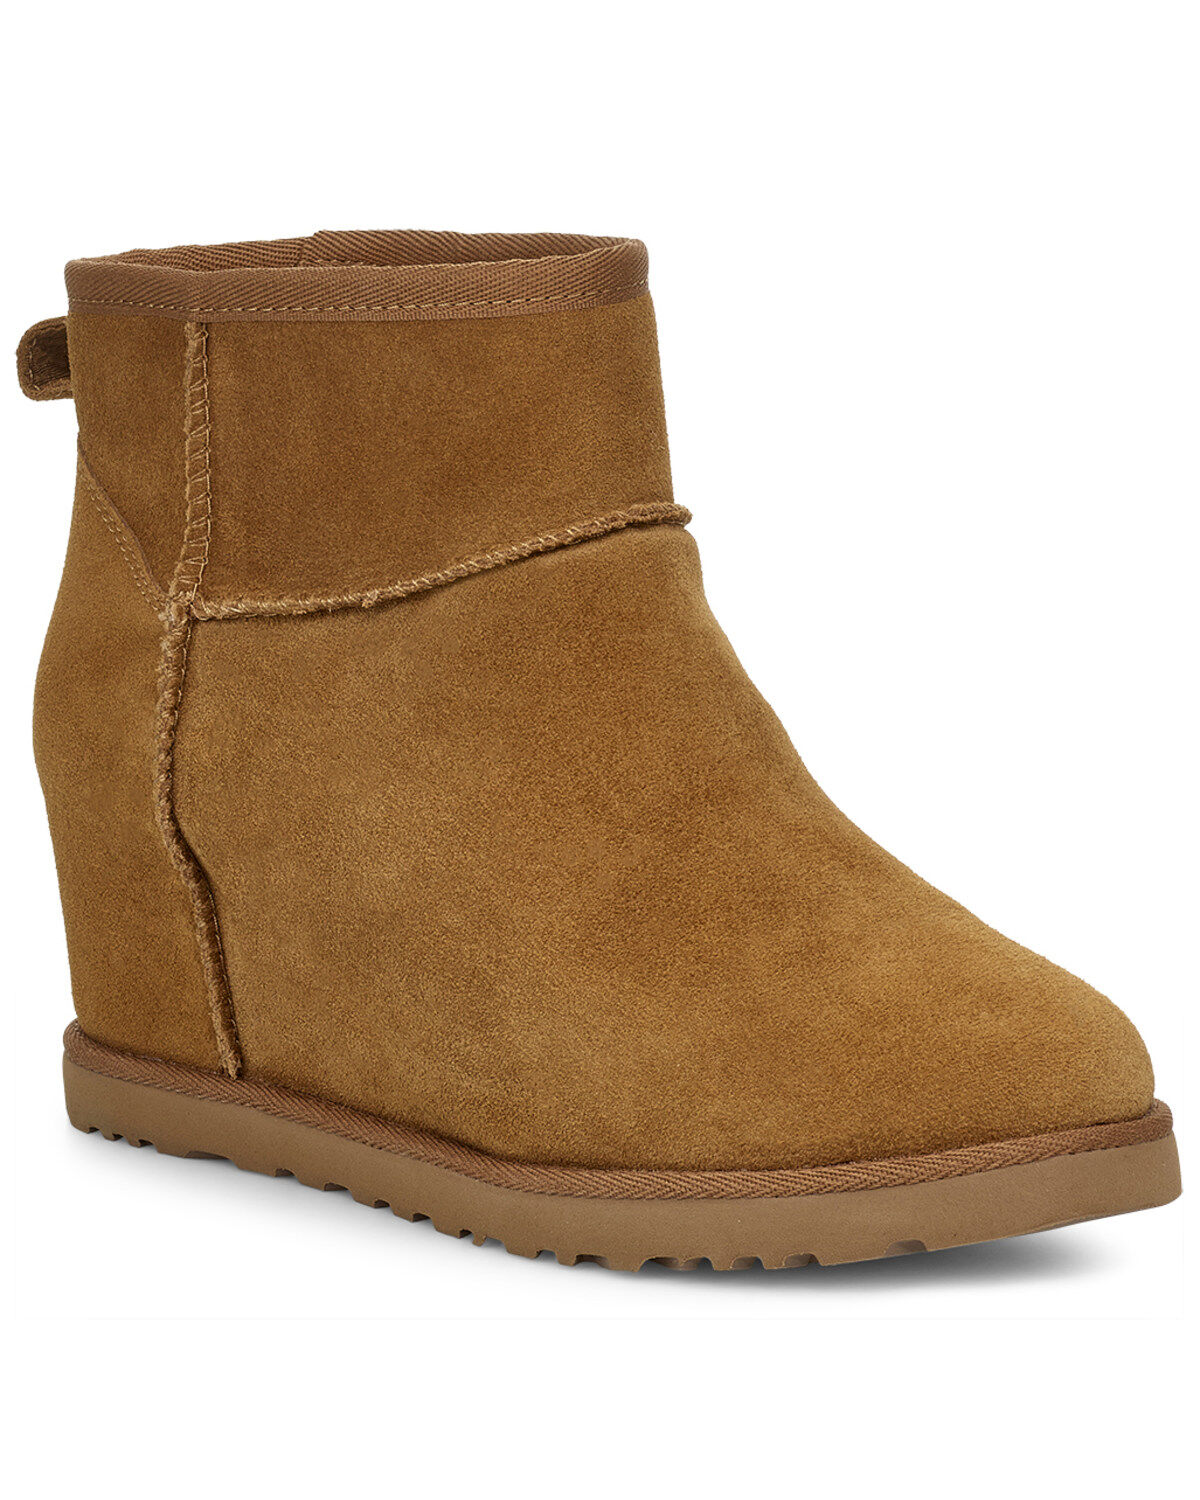 womens ugg style boots